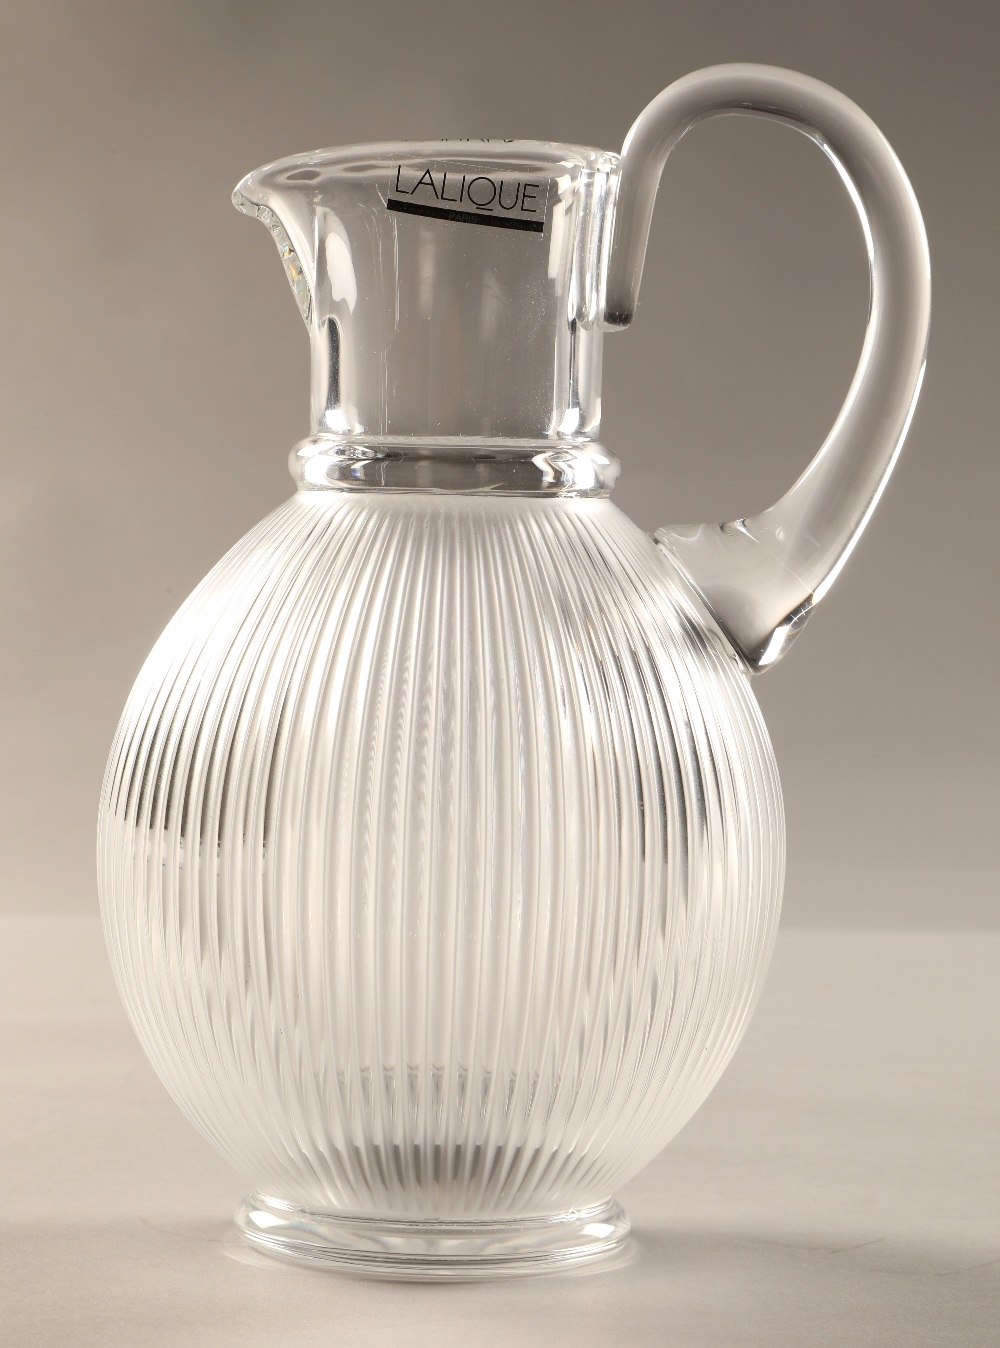 Lalique Langeais Pitcher, etched Lalique France to the base, 22 cm high, in Lalique box